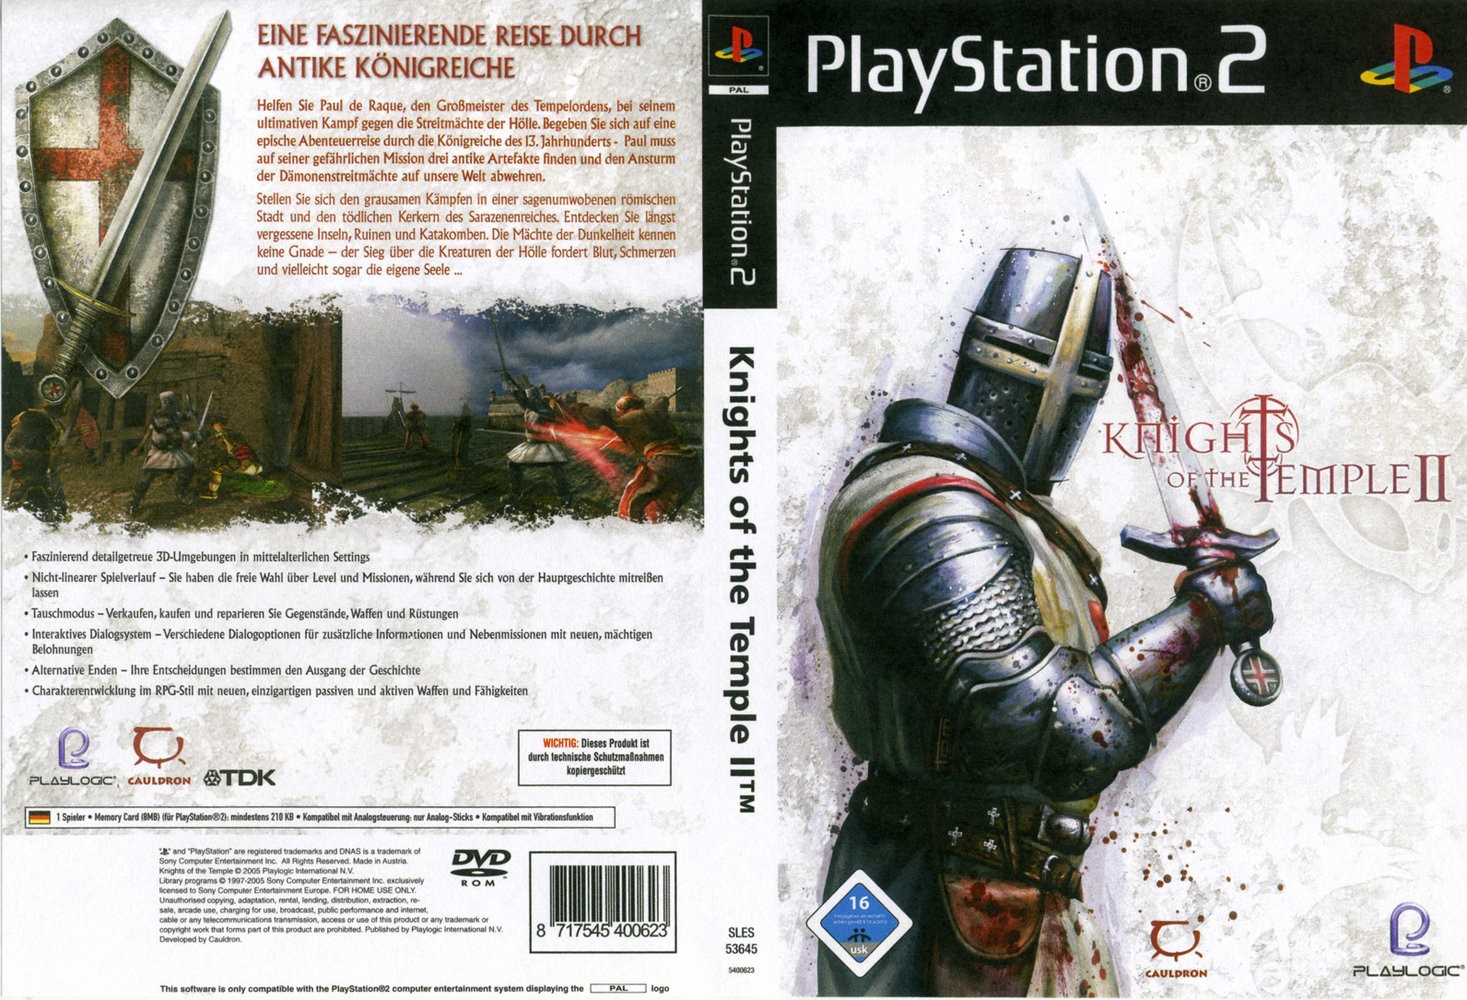 knights-of-the-temple-ii-ps2-cover